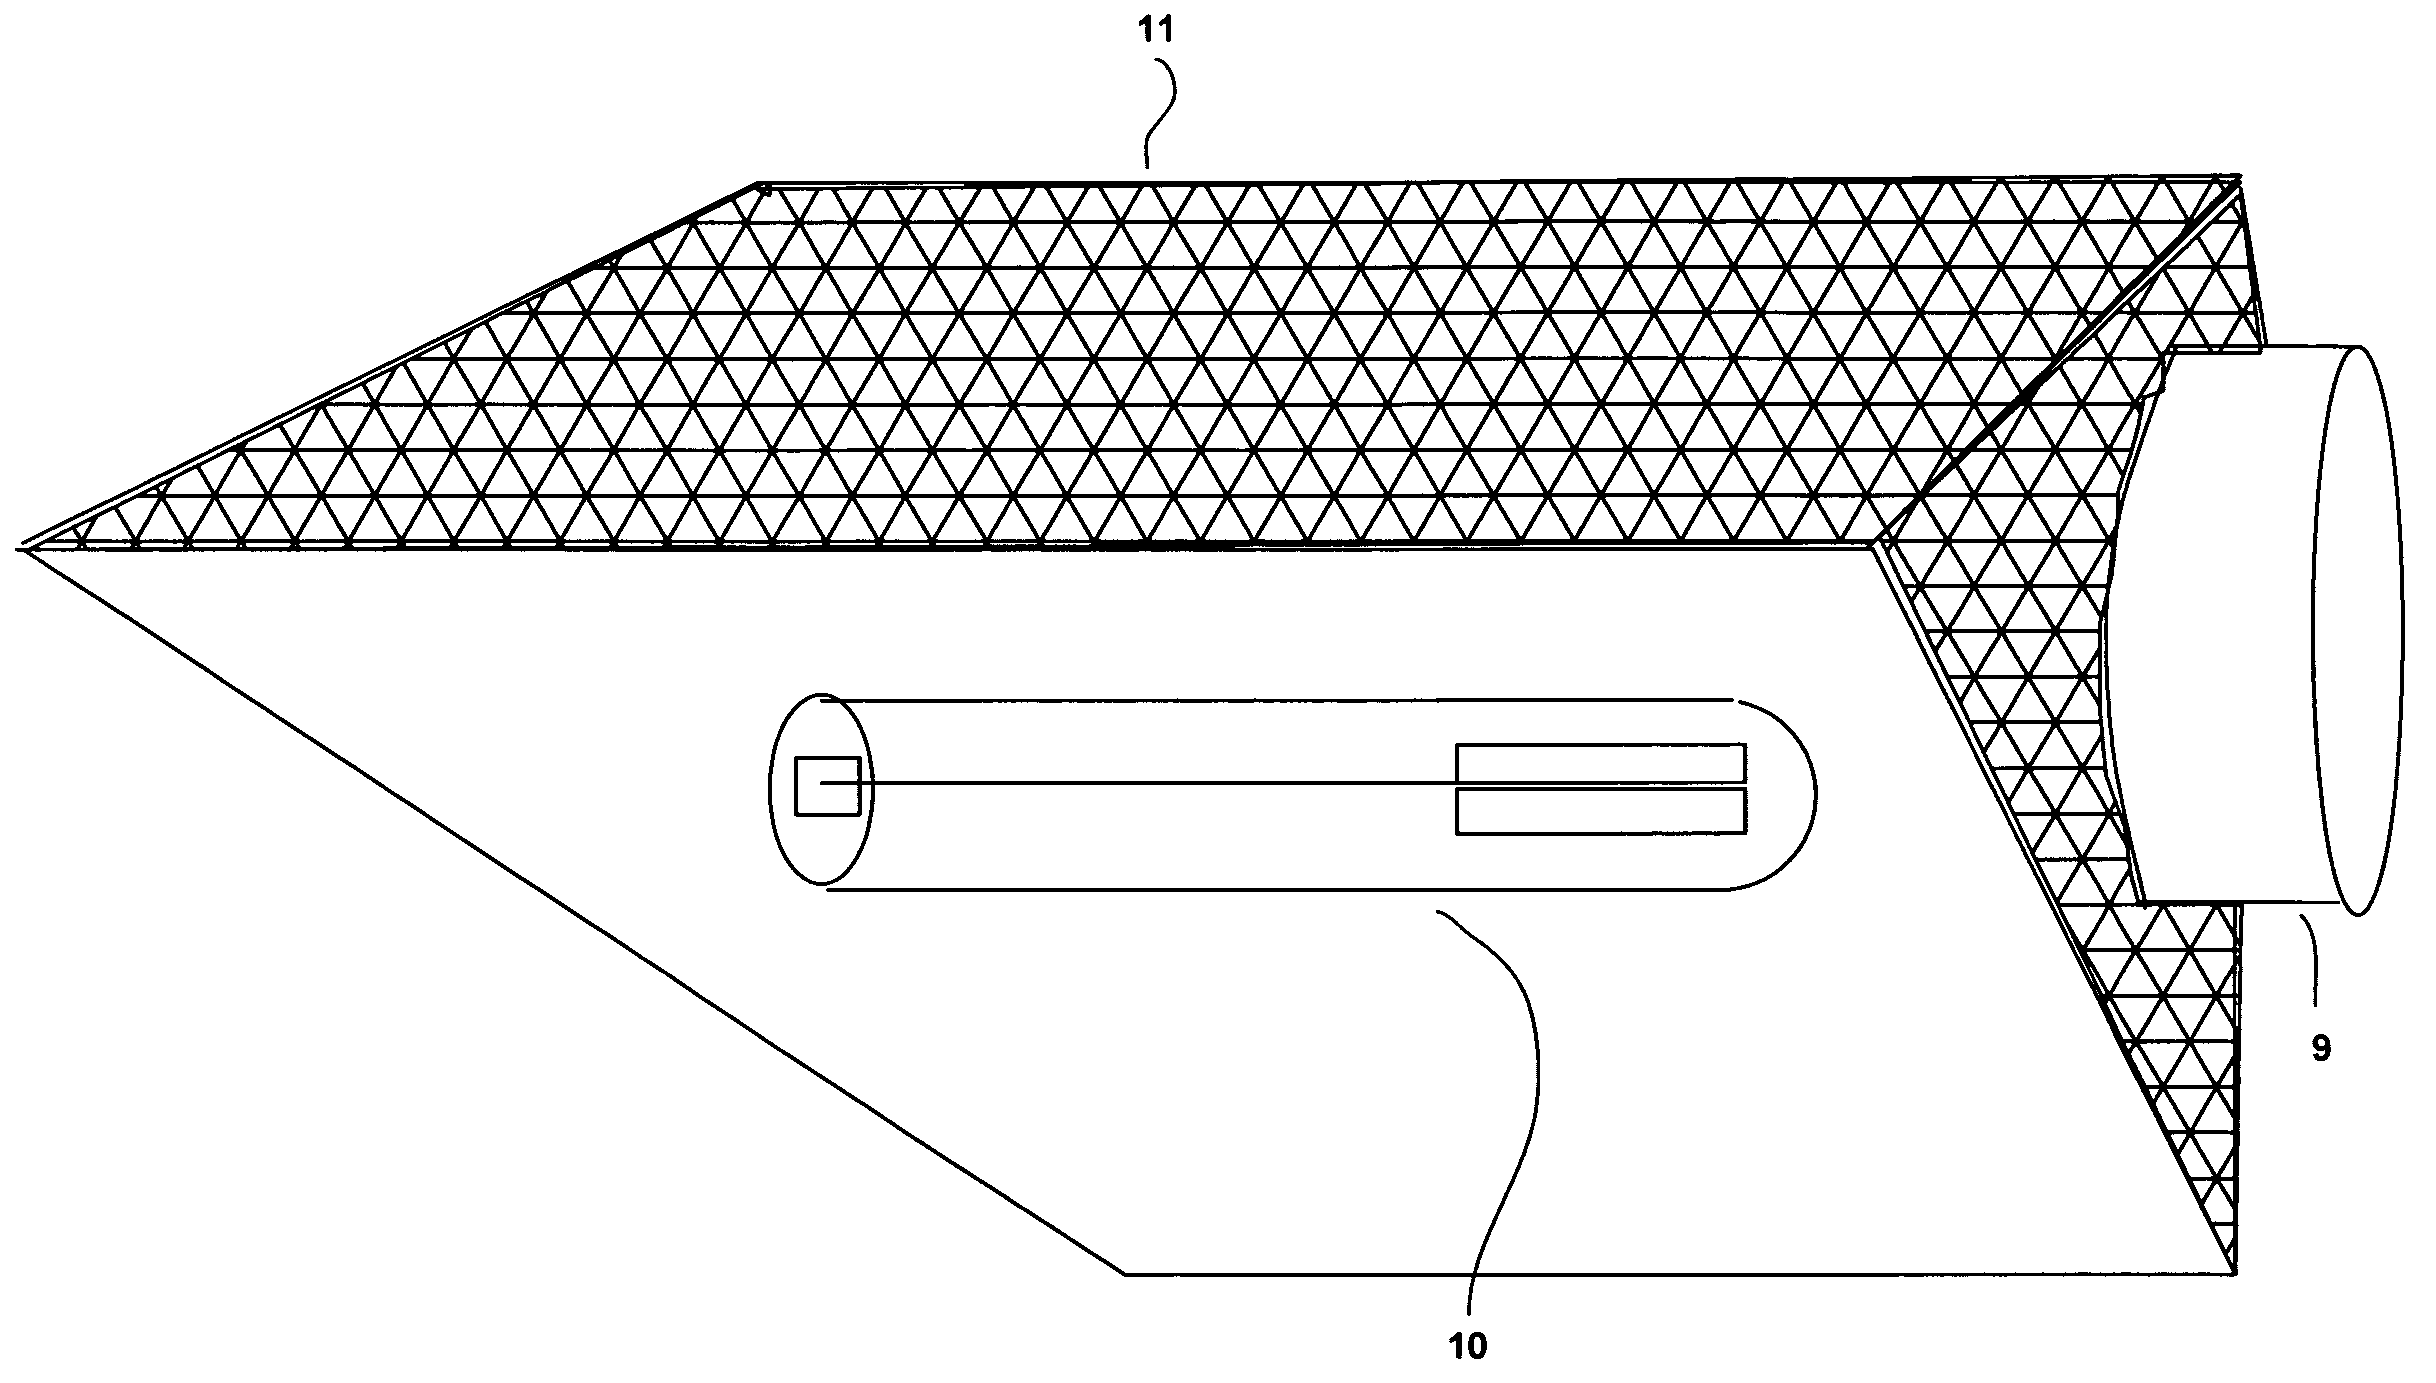 Method and apparatus for insulating hydroponic lamps